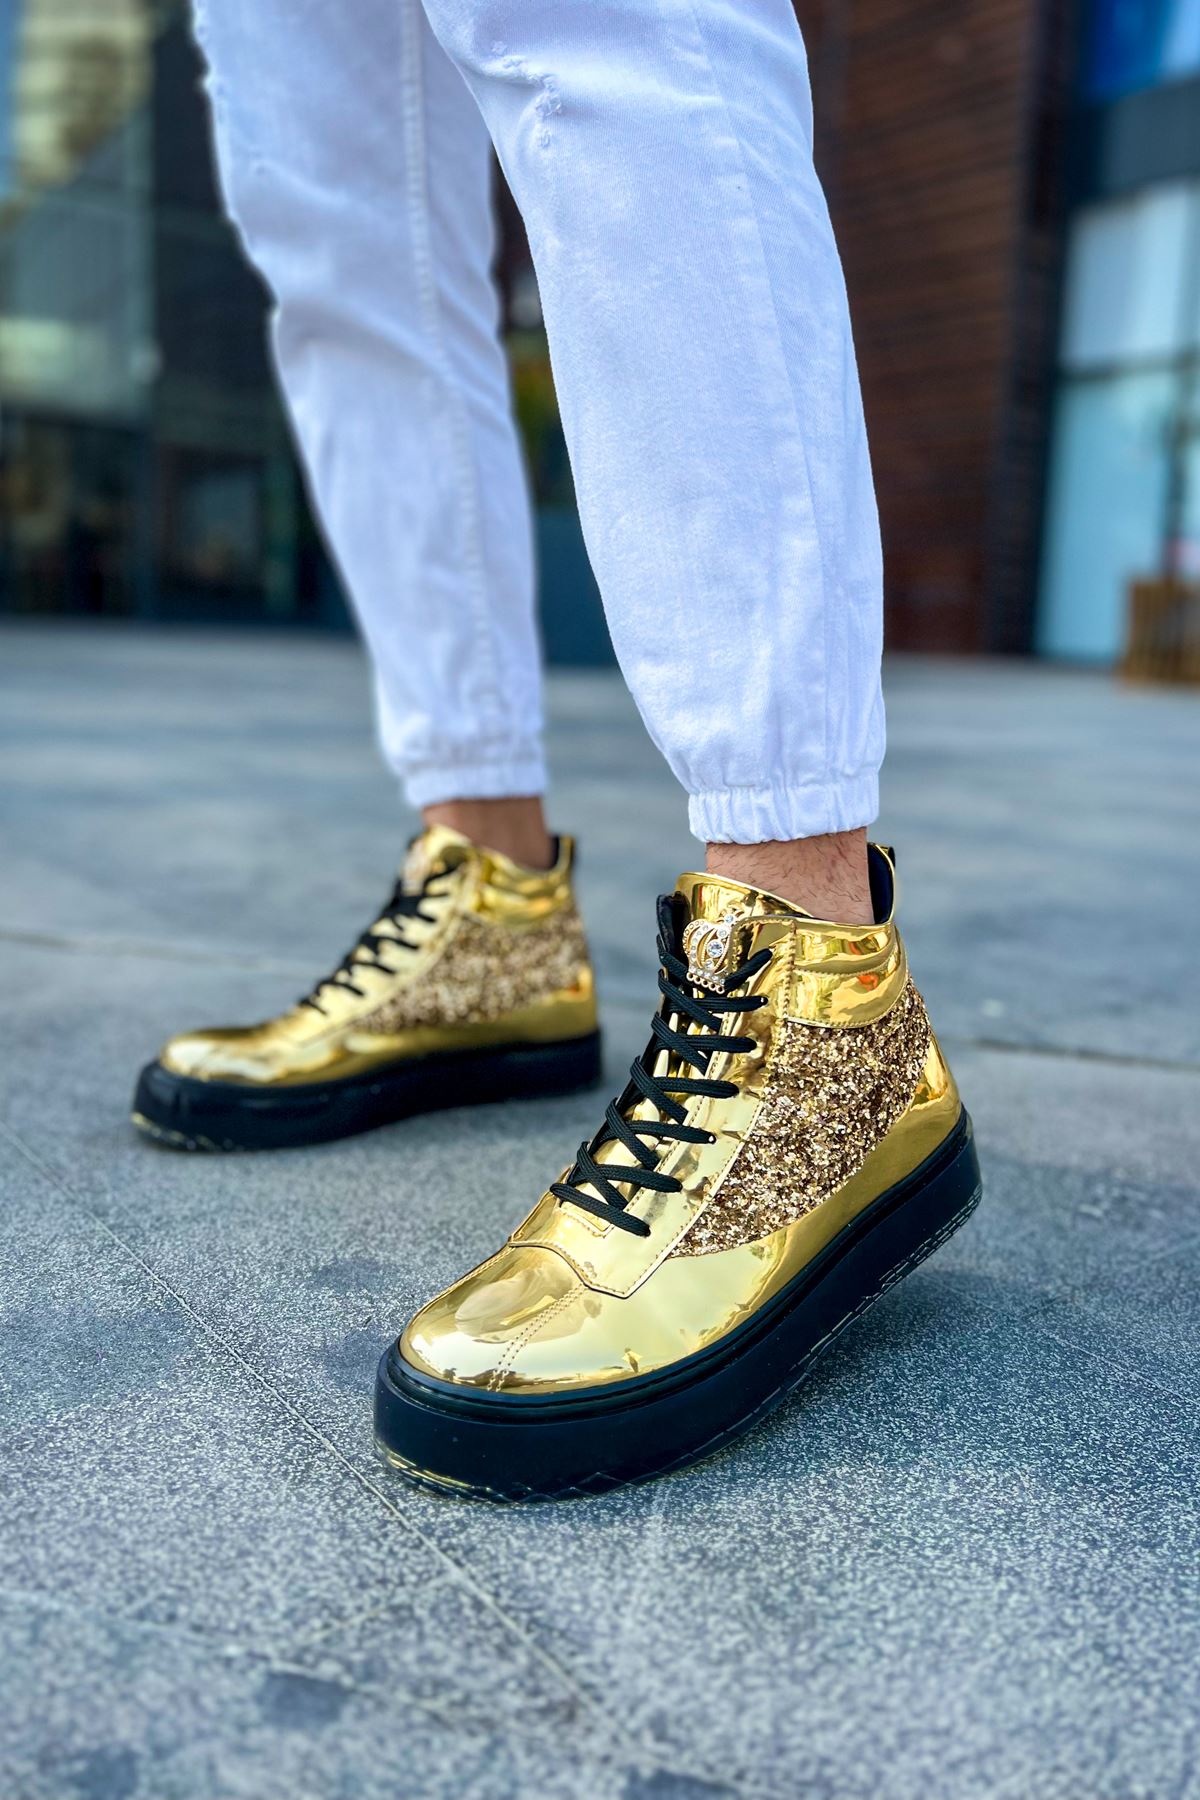 CH973 Majesty ST Men's Sneakers Shoes Boots GOLD - STREETMODE™